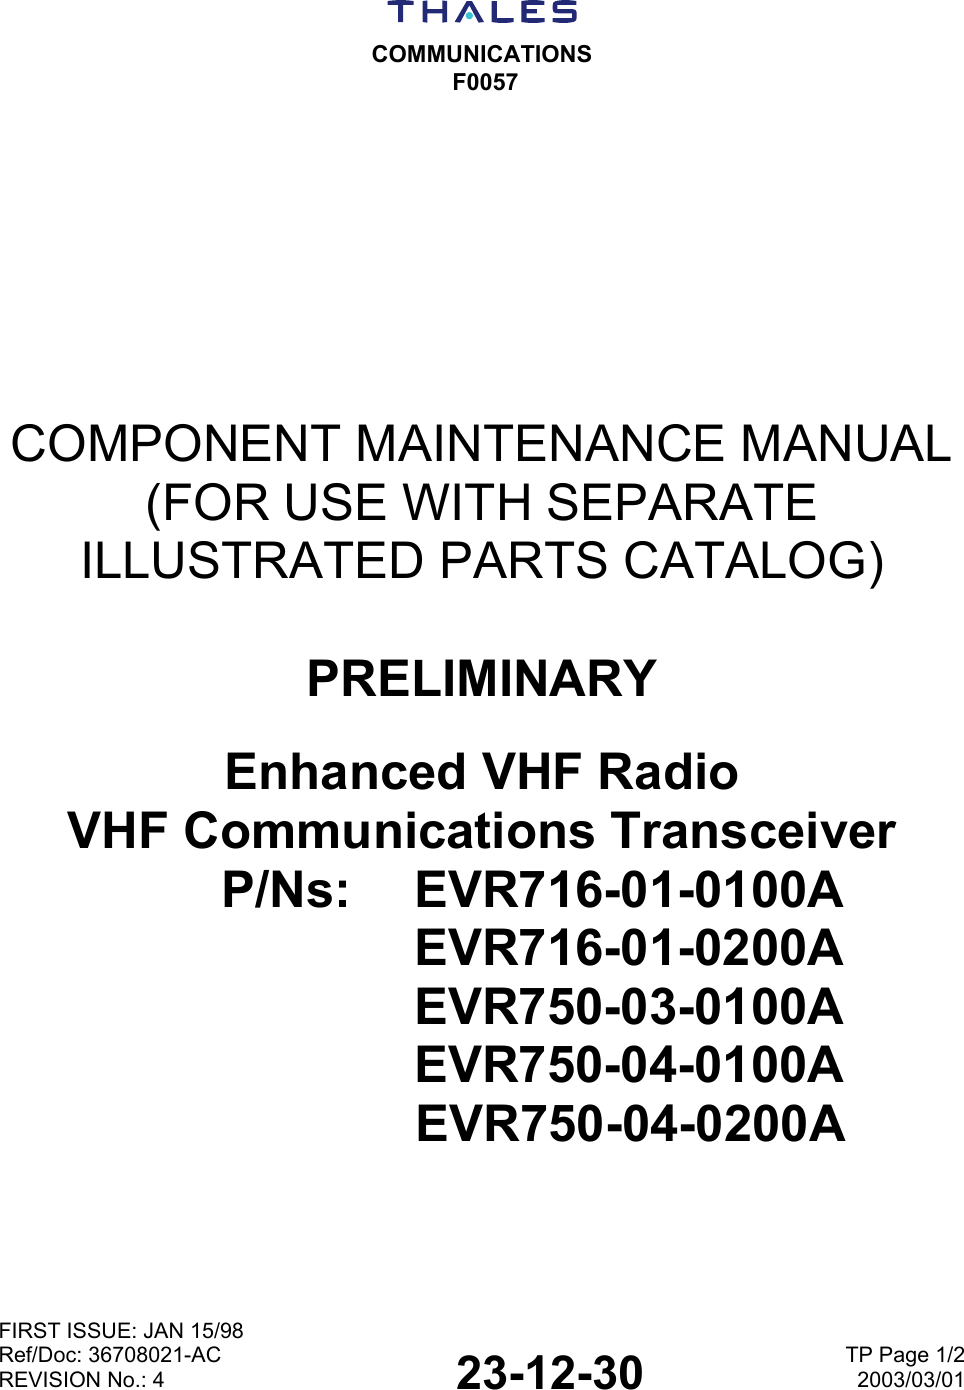  COMMUNICATIONS F0057  FIRST ISSUE: JAN 15/98 Ref/Doc: 36708021-AC REVISION No.: 4  23-12-30 TP Page 1/22003/03/01 COMPONENT MAINTENANCE MANUAL (FOR USE WITH SEPARATE ILLUSTRATED PARTS CATALOG)  PRELIMINARY Enhanced VHF Radio VHF Communications Transceiver P/Ns: EVR716-01-0100A EVR716-01-0200A  EVR750-03-0100A   EVR750-04-0100A      EVR750-04-0200A